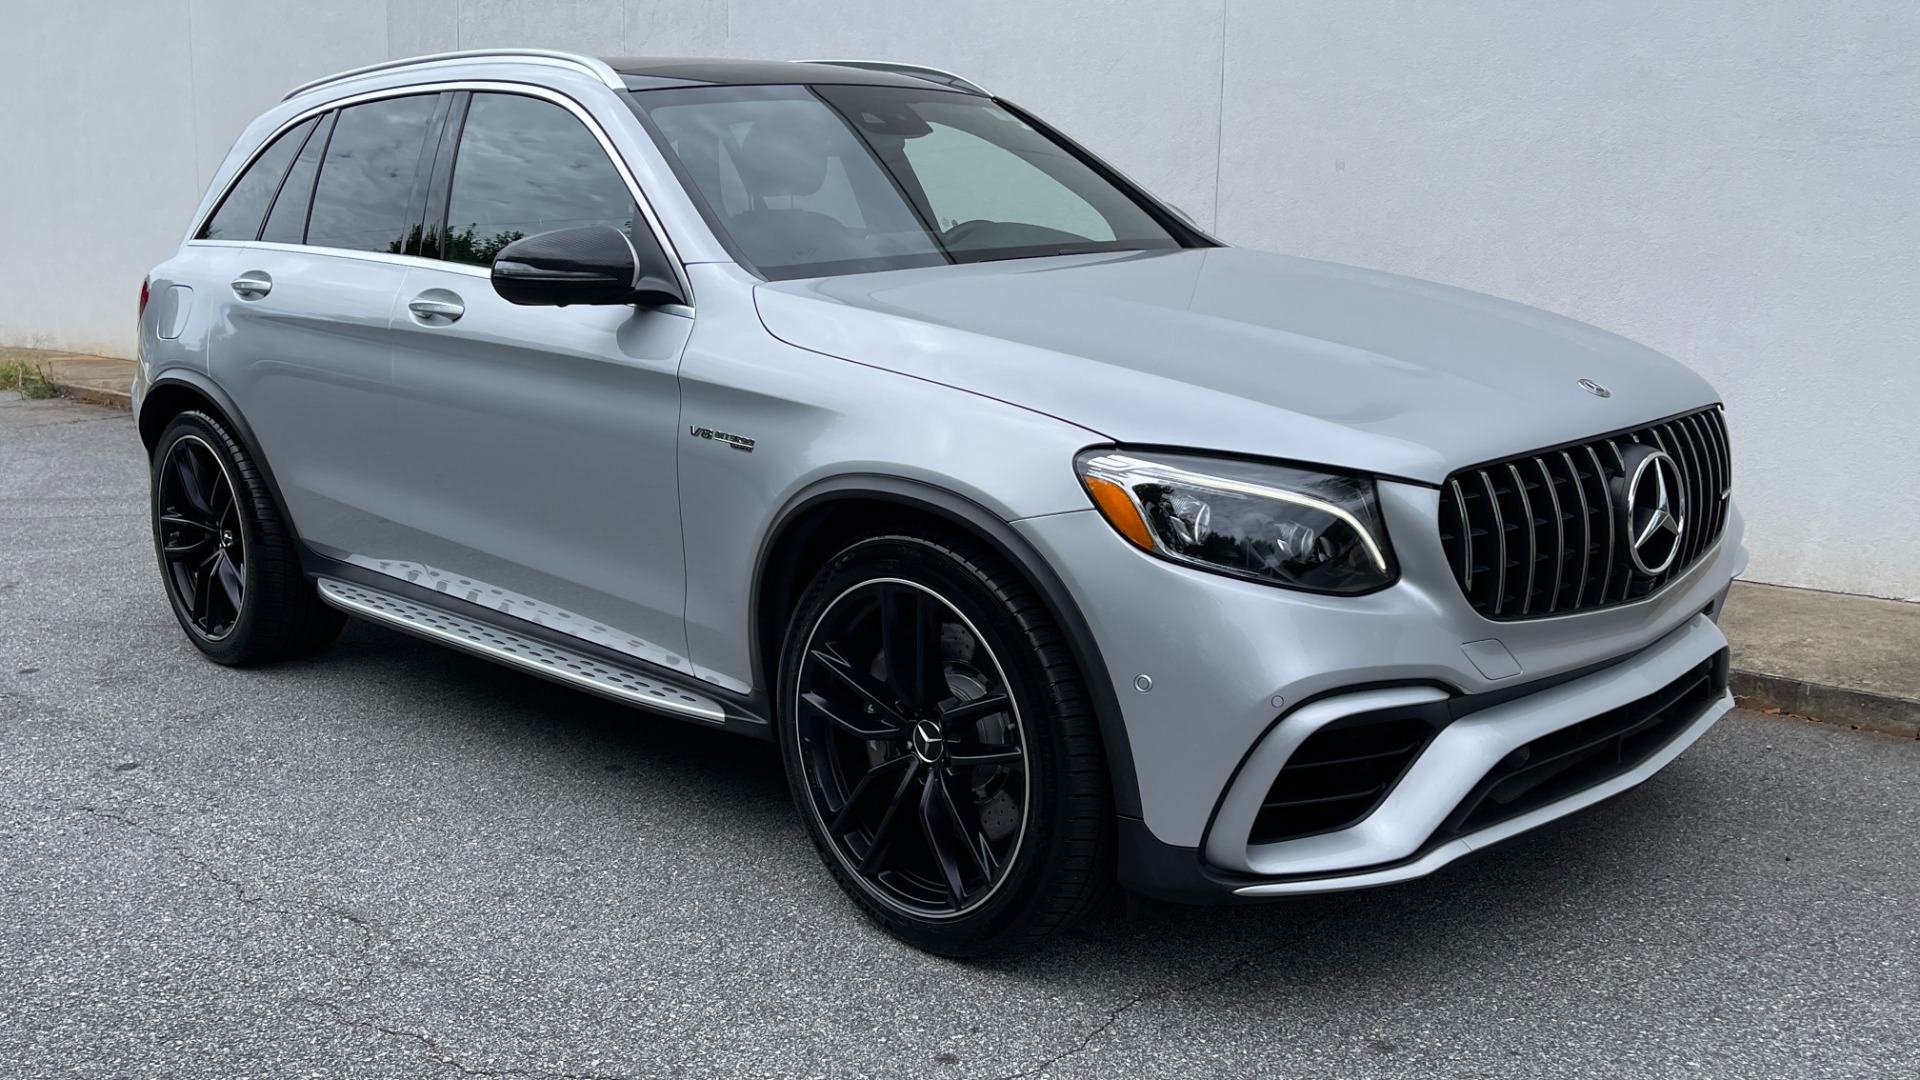 Used 2019 Mercedes-Benz GLC AMG GLC 63 / 4MATIC+ / PANORAMIC ROOF / CARBON FIBER / LIGHT PACKAGE / PERF for sale $66,995 at Formula Imports in Charlotte NC 28227 2